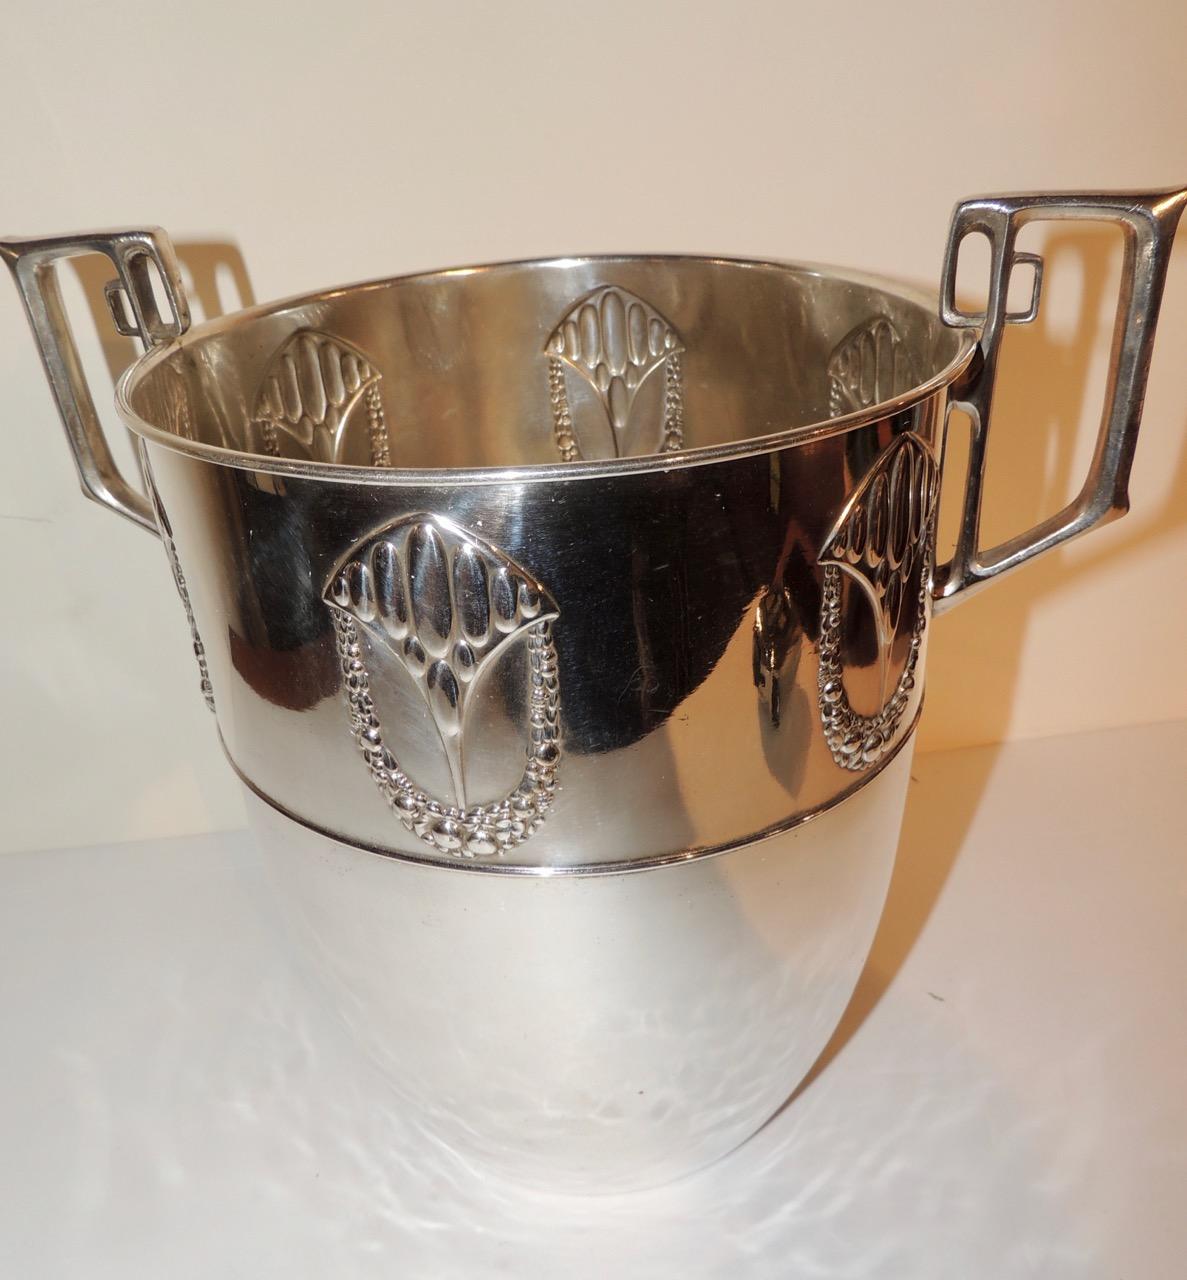 1920s Silver Champagne cooler with Repousse Floral Motif, 1920s In Good Condition For Sale In Oakland, CA